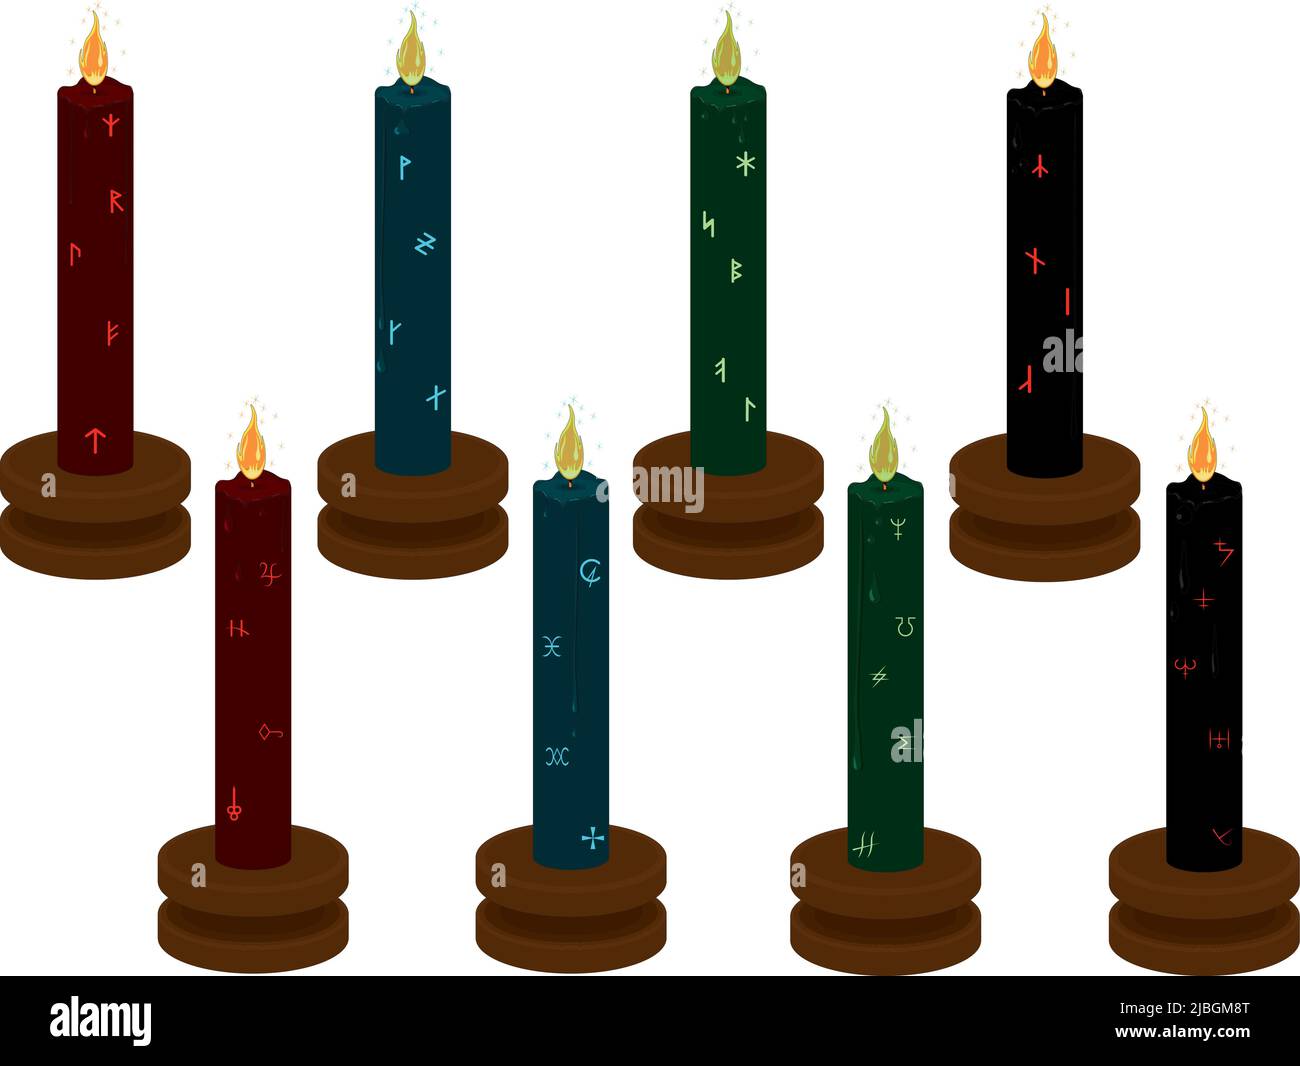 Magic candles with runes and alchemy symbols for rituals vector illustration Stock Vector